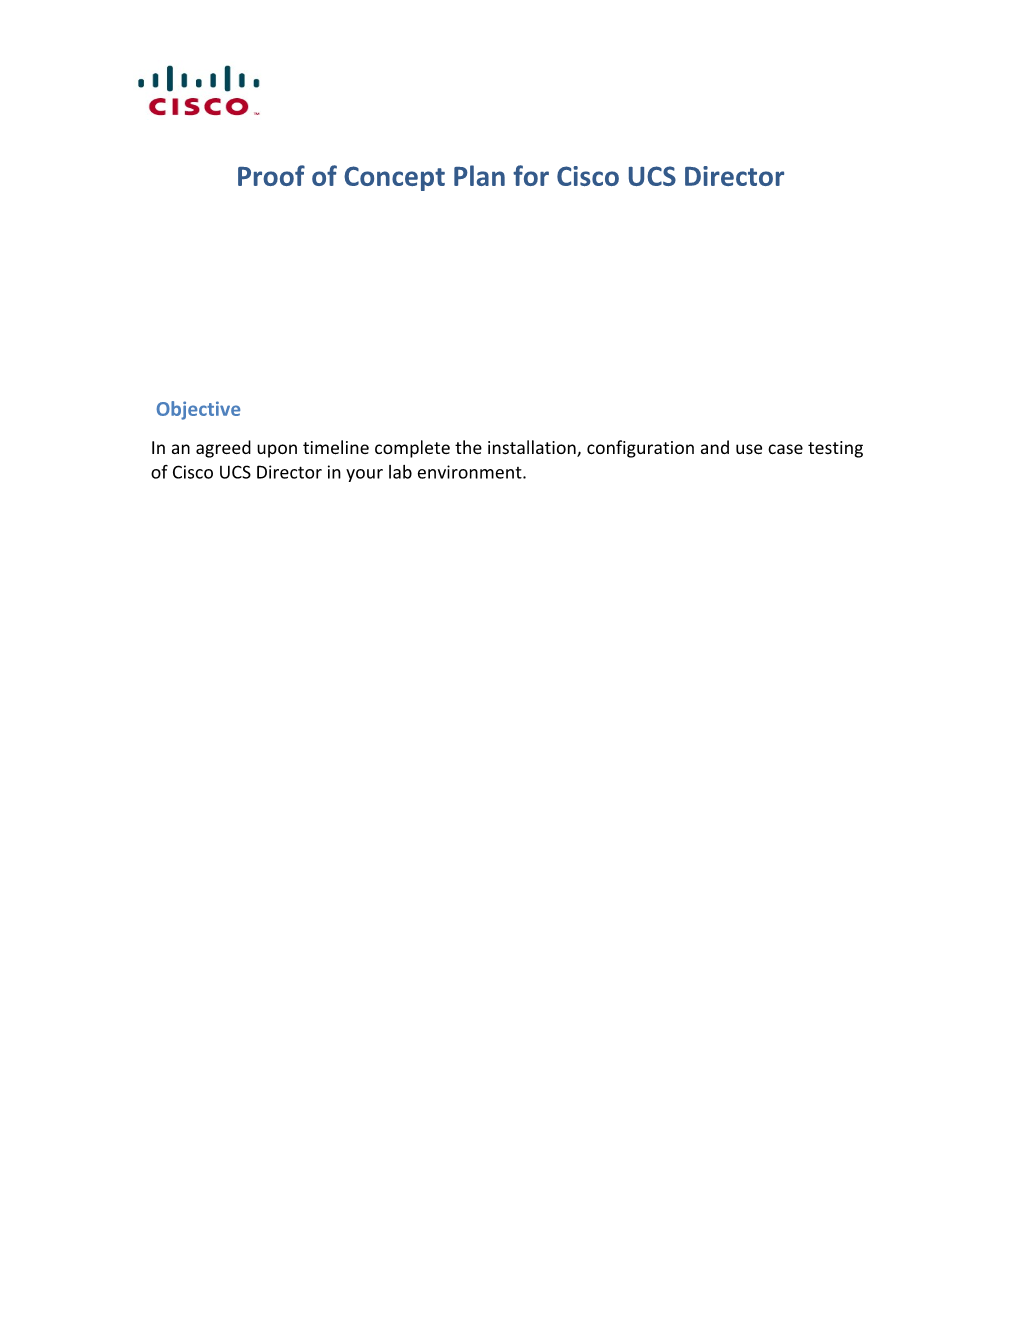 Proof of Concept Plan for Cisco UCS Director